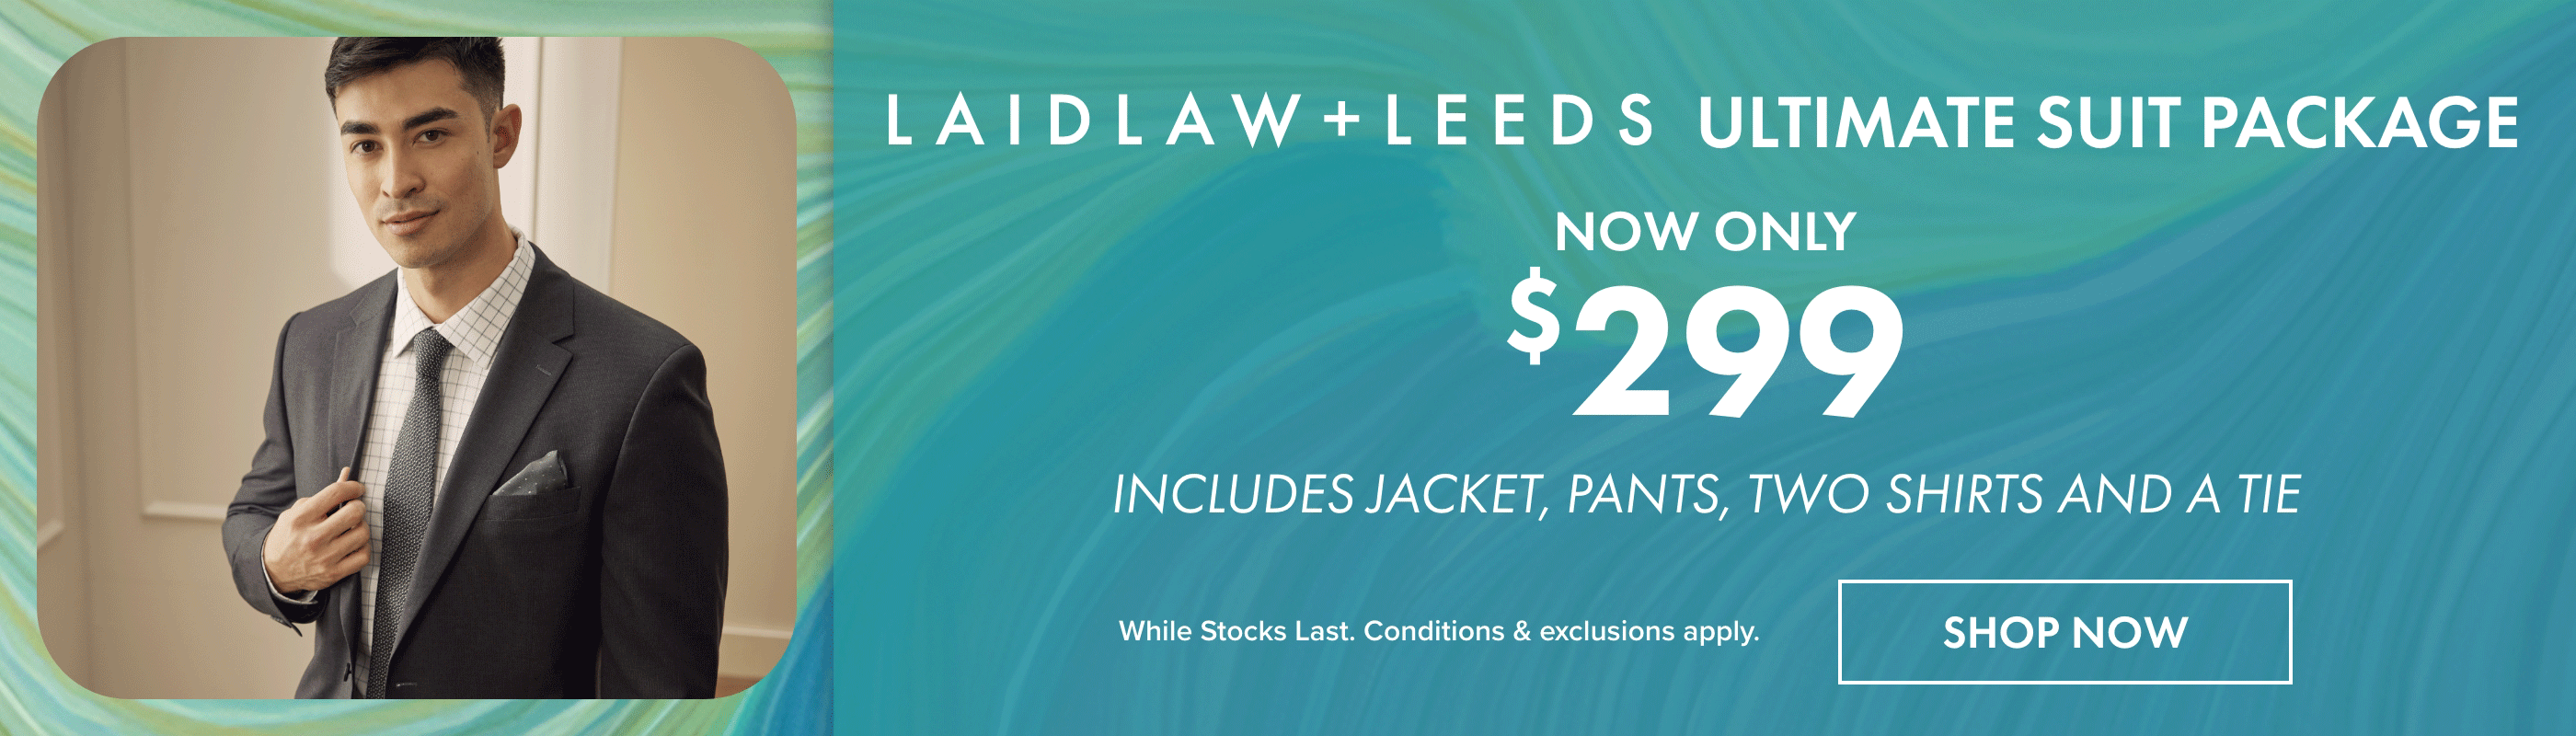 Laidlaw + Leeds Ultimate Suit Package for only $299 includes jacket, pants, two shirts and a tie